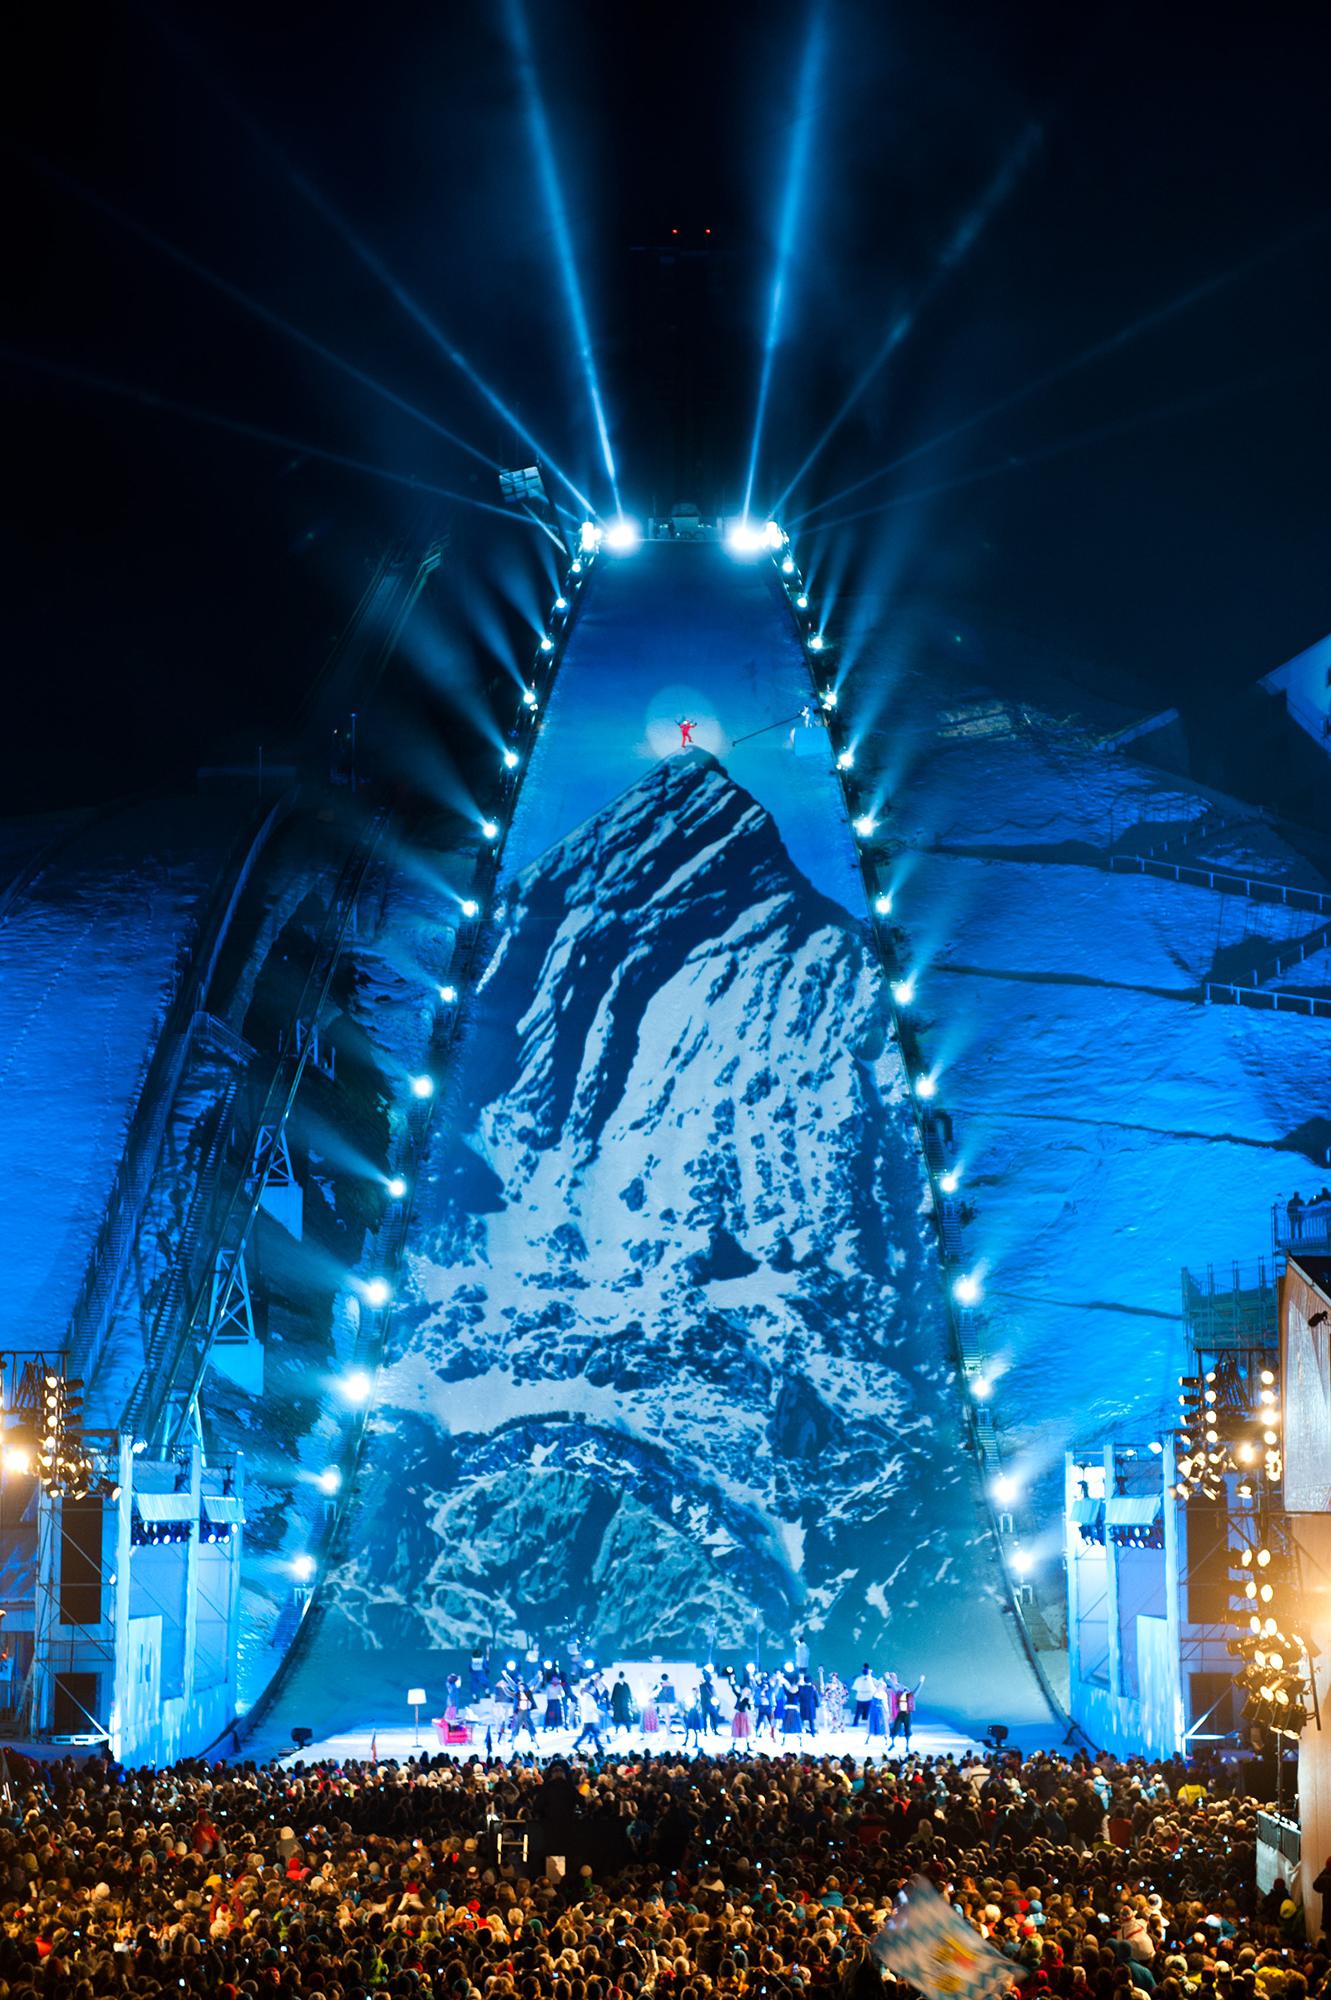 A mountain is projection mapped onto the ski slope as a sea of people looks on.